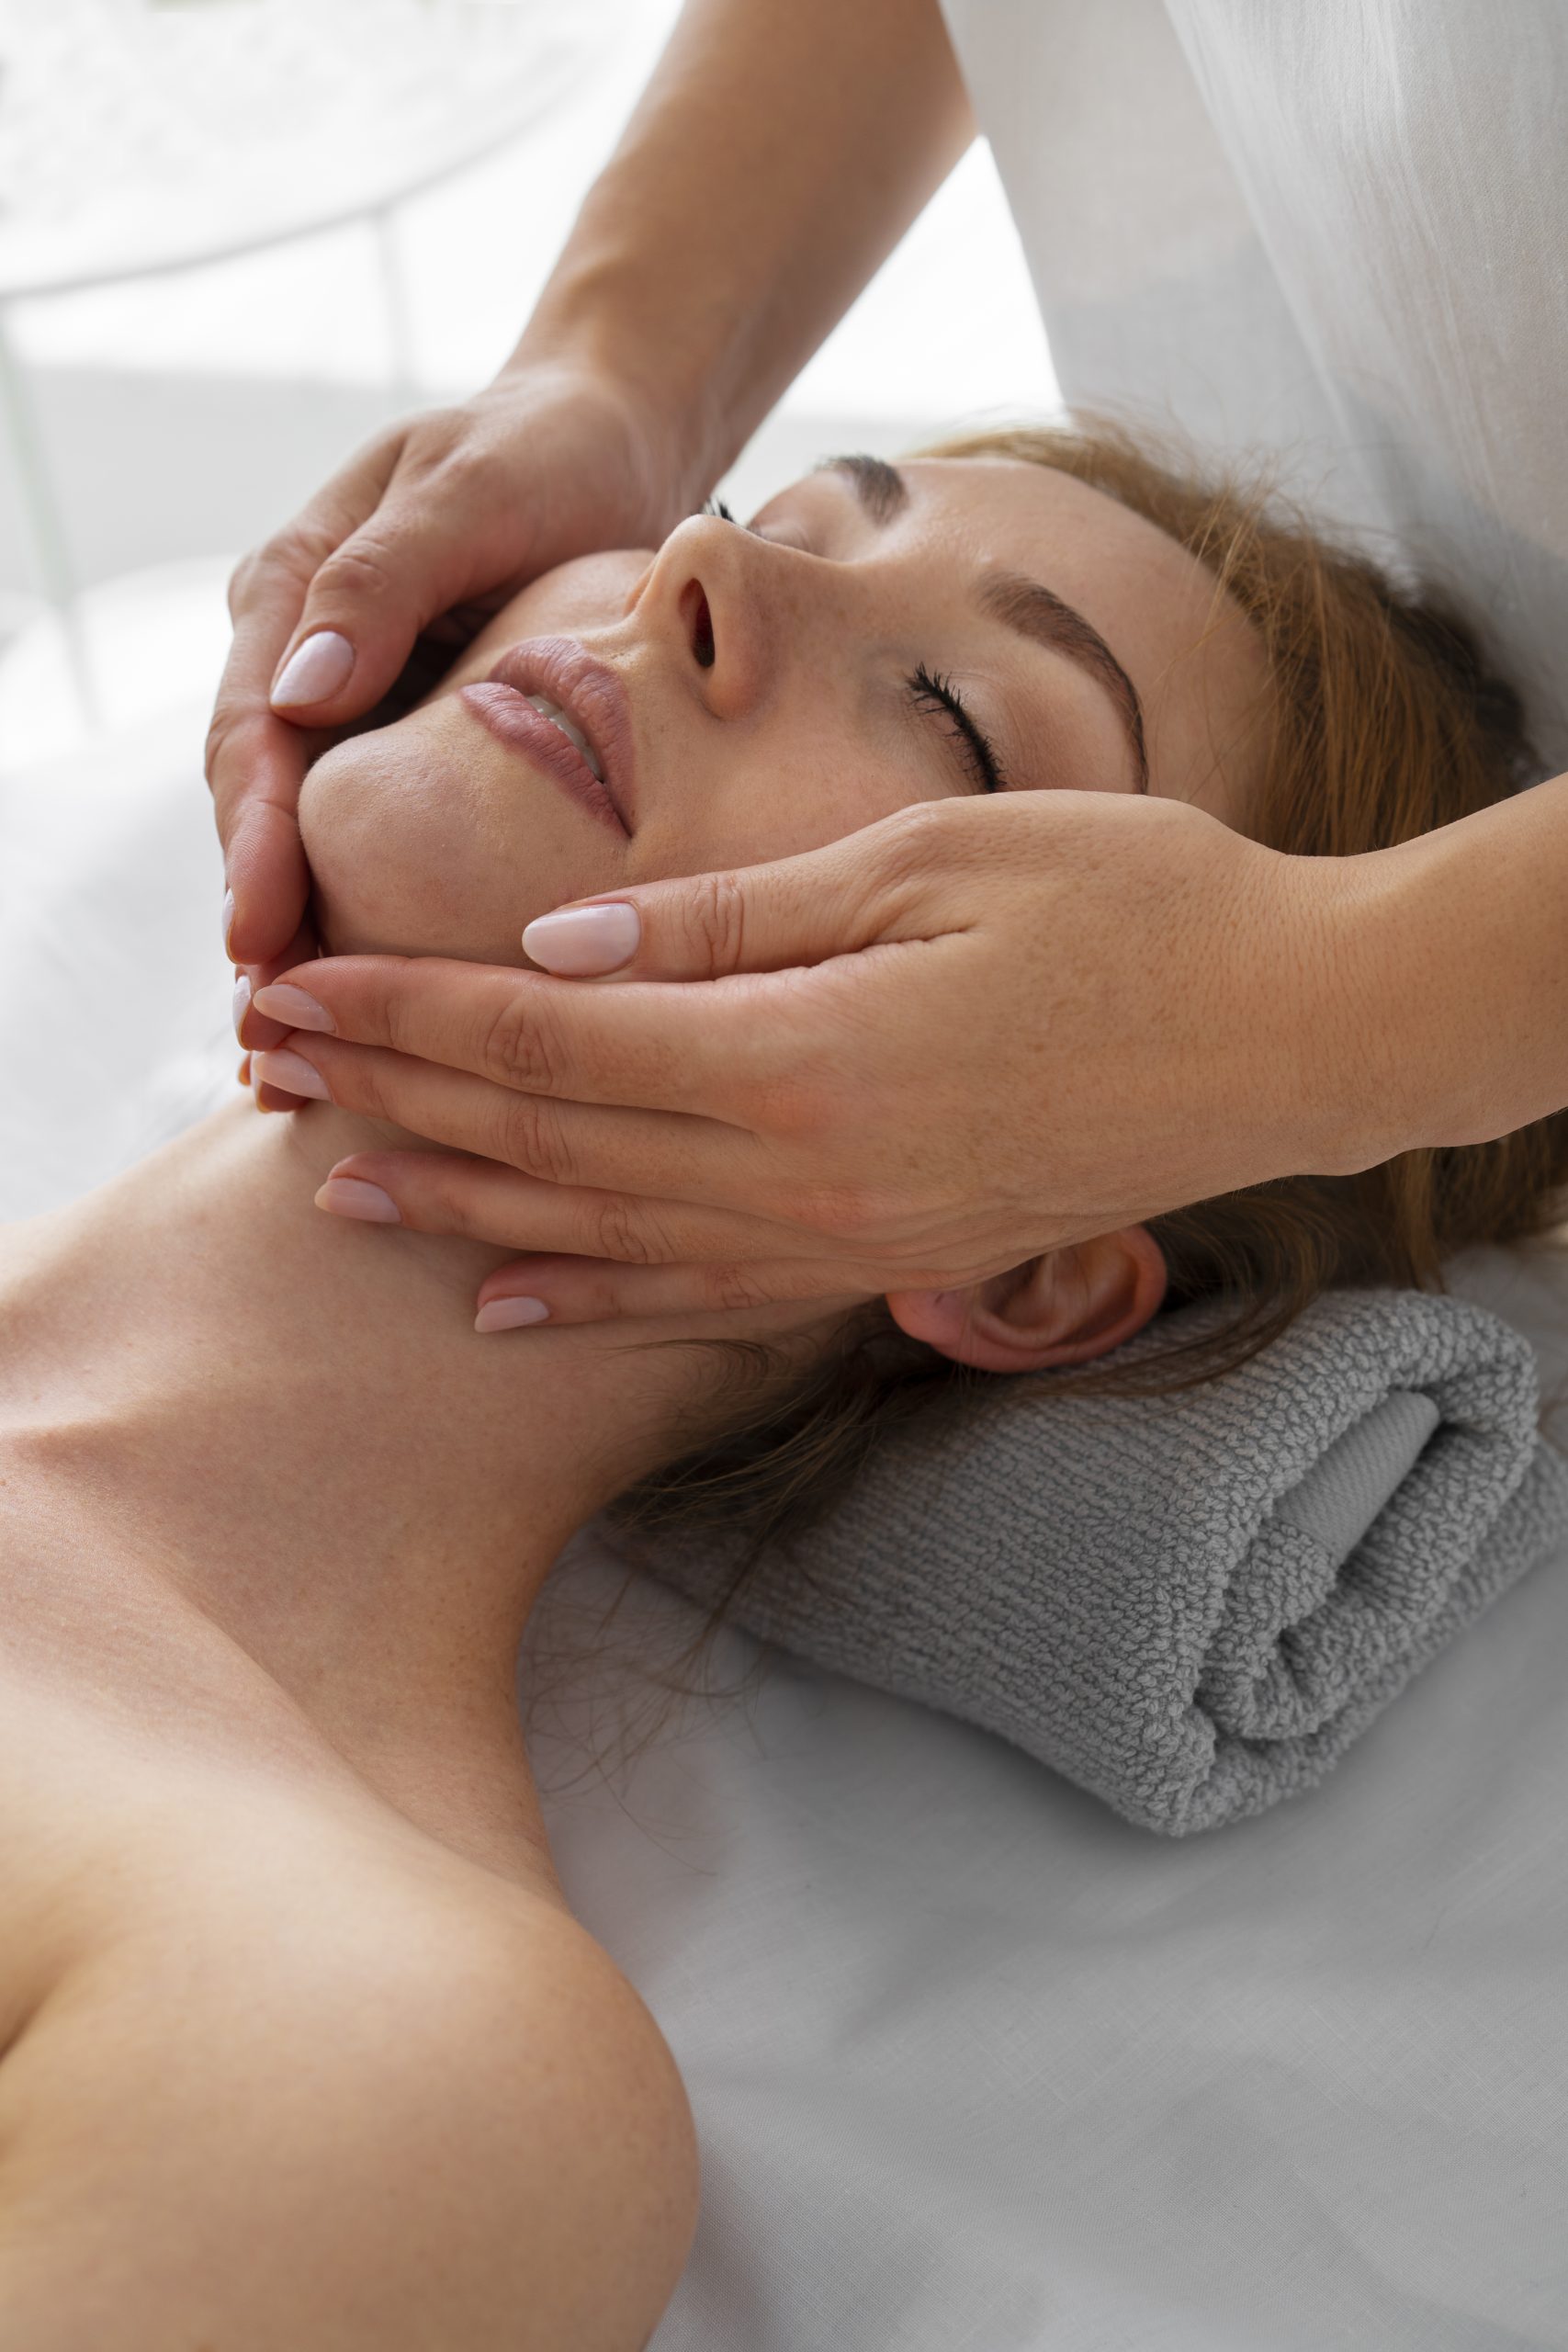 A woman getting a relaxing facial massage from a masseuse